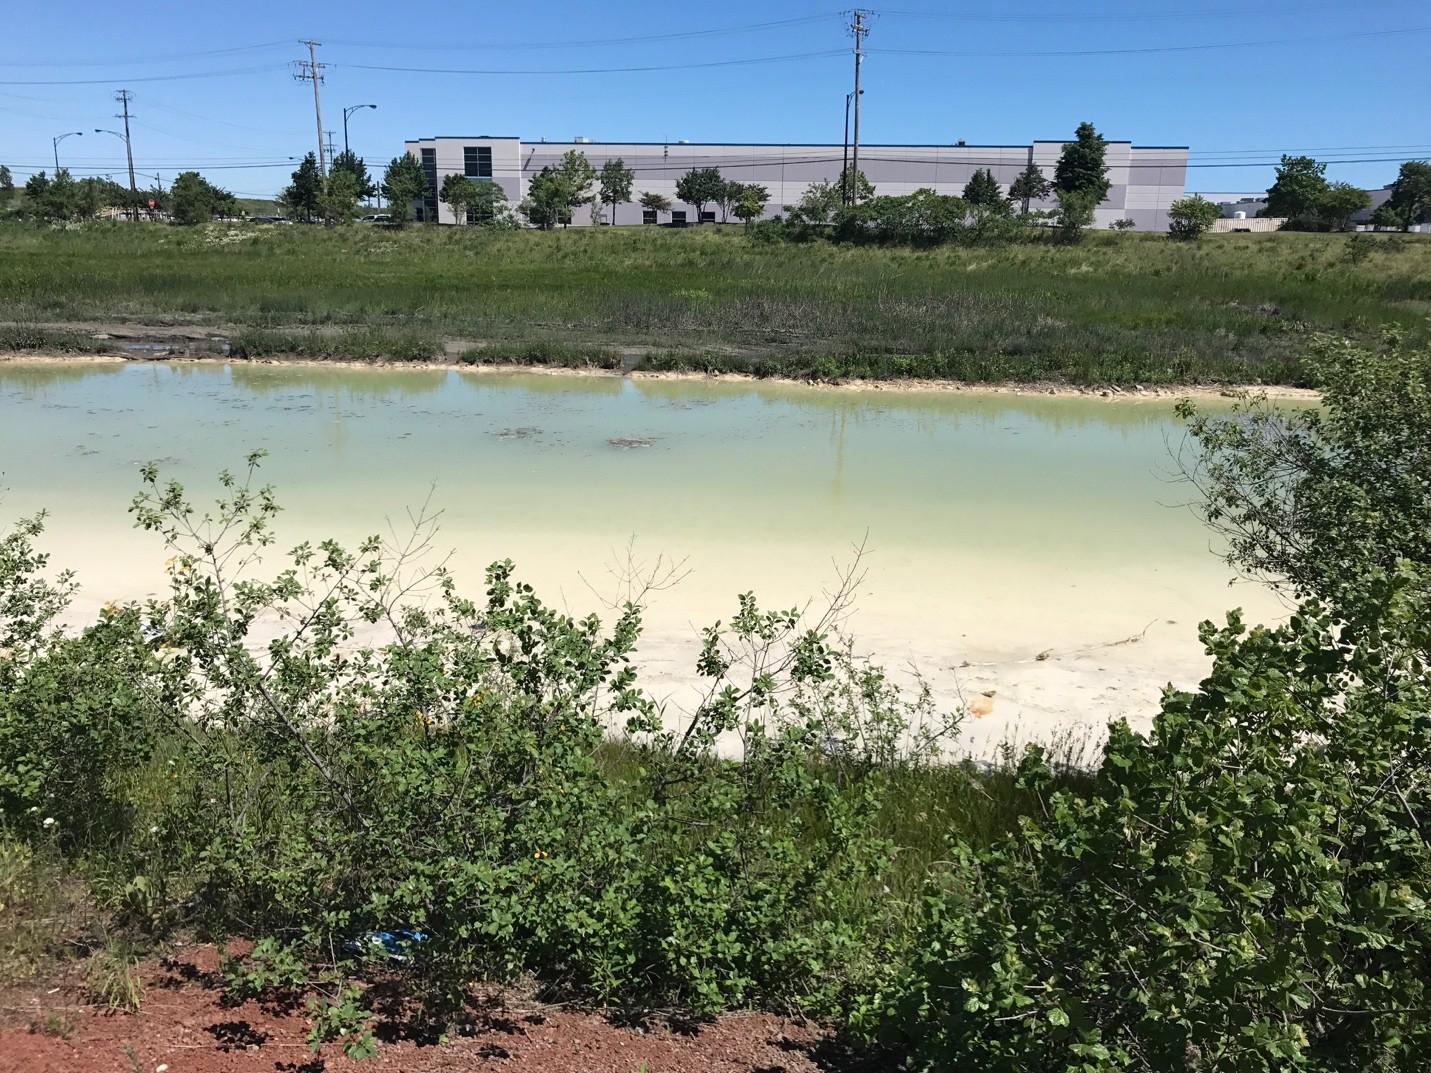 Environmental toxins from the Schroud property have polluted Indian Creek, which flows through the northern portion of the site. (Courtesy Chicago Legal Clinic)